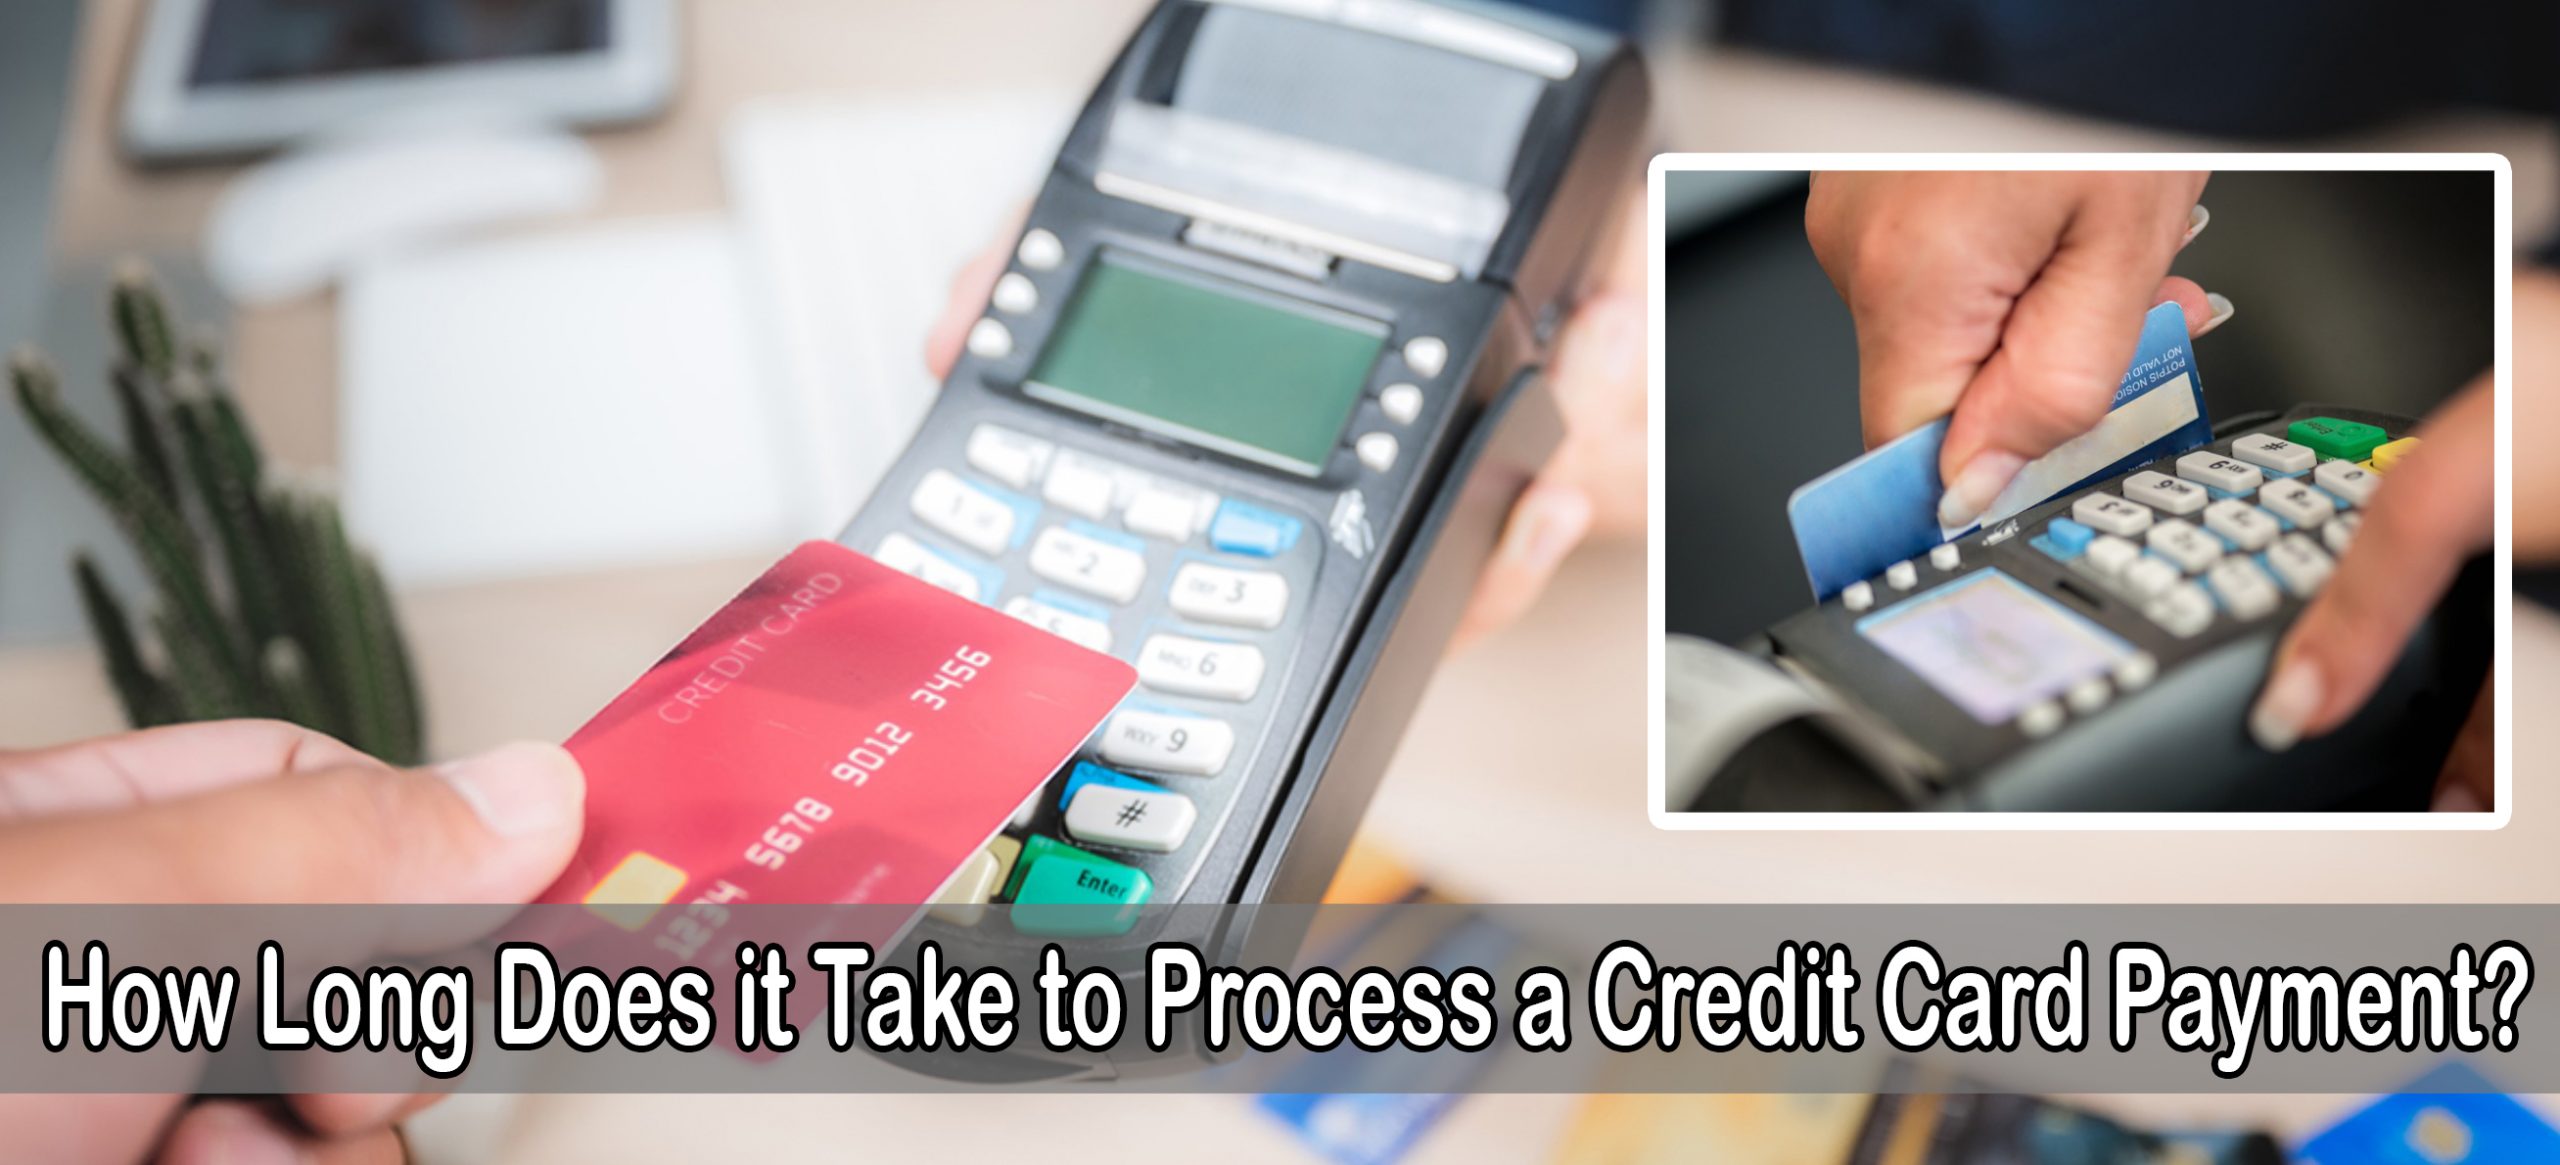 How Long Does it Take to Process a Credit Card Payment?